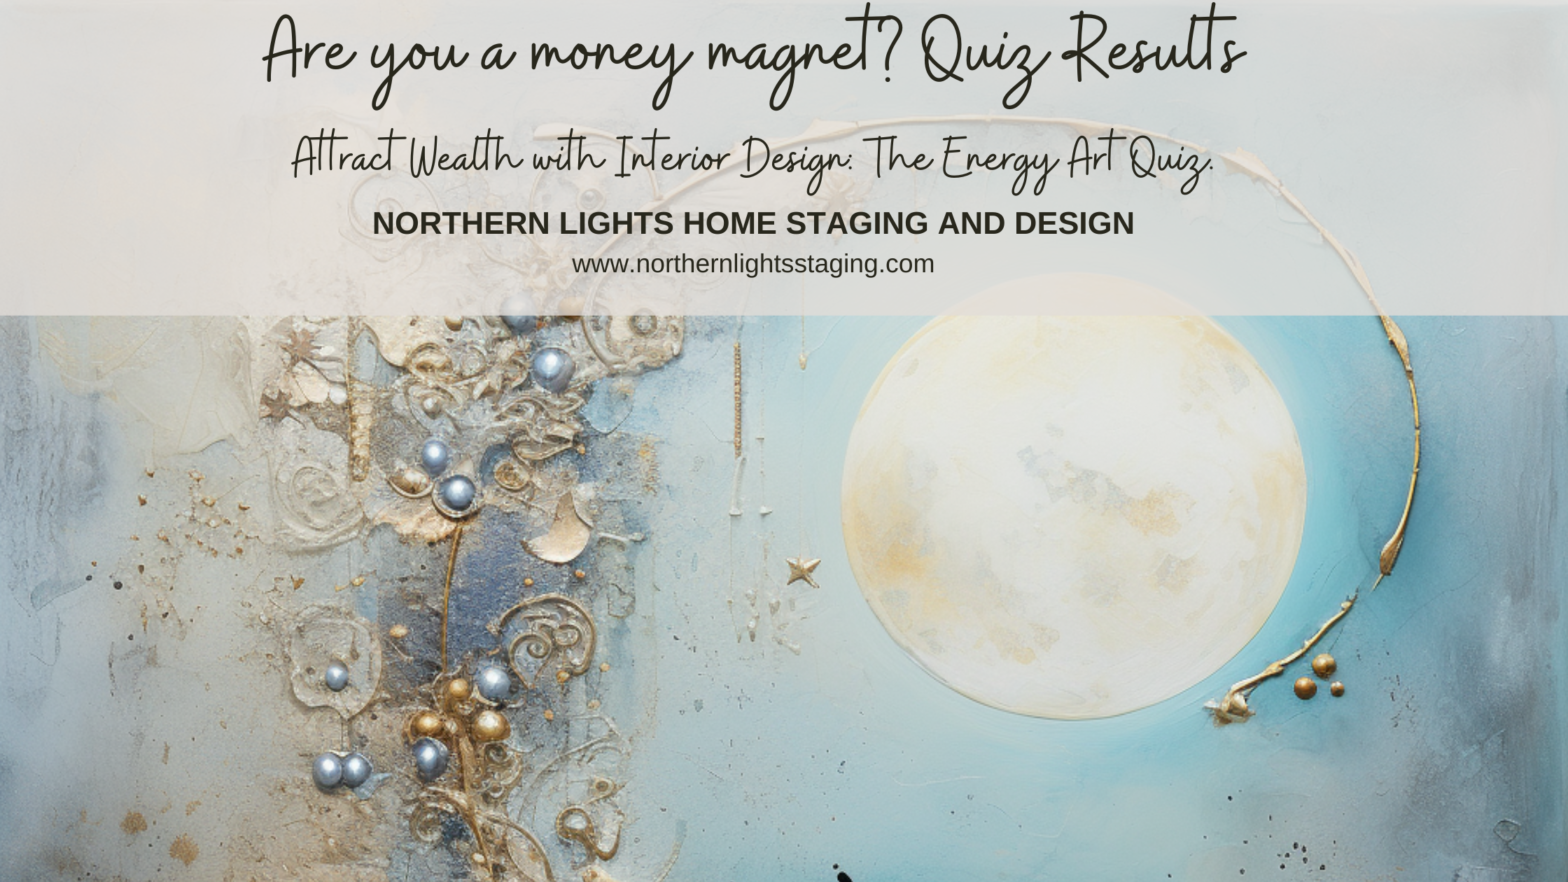 Quiz results for Attract Wealth with Interior Design: The Energy Art Quiz"- Northern Lights Home Staging and Design.